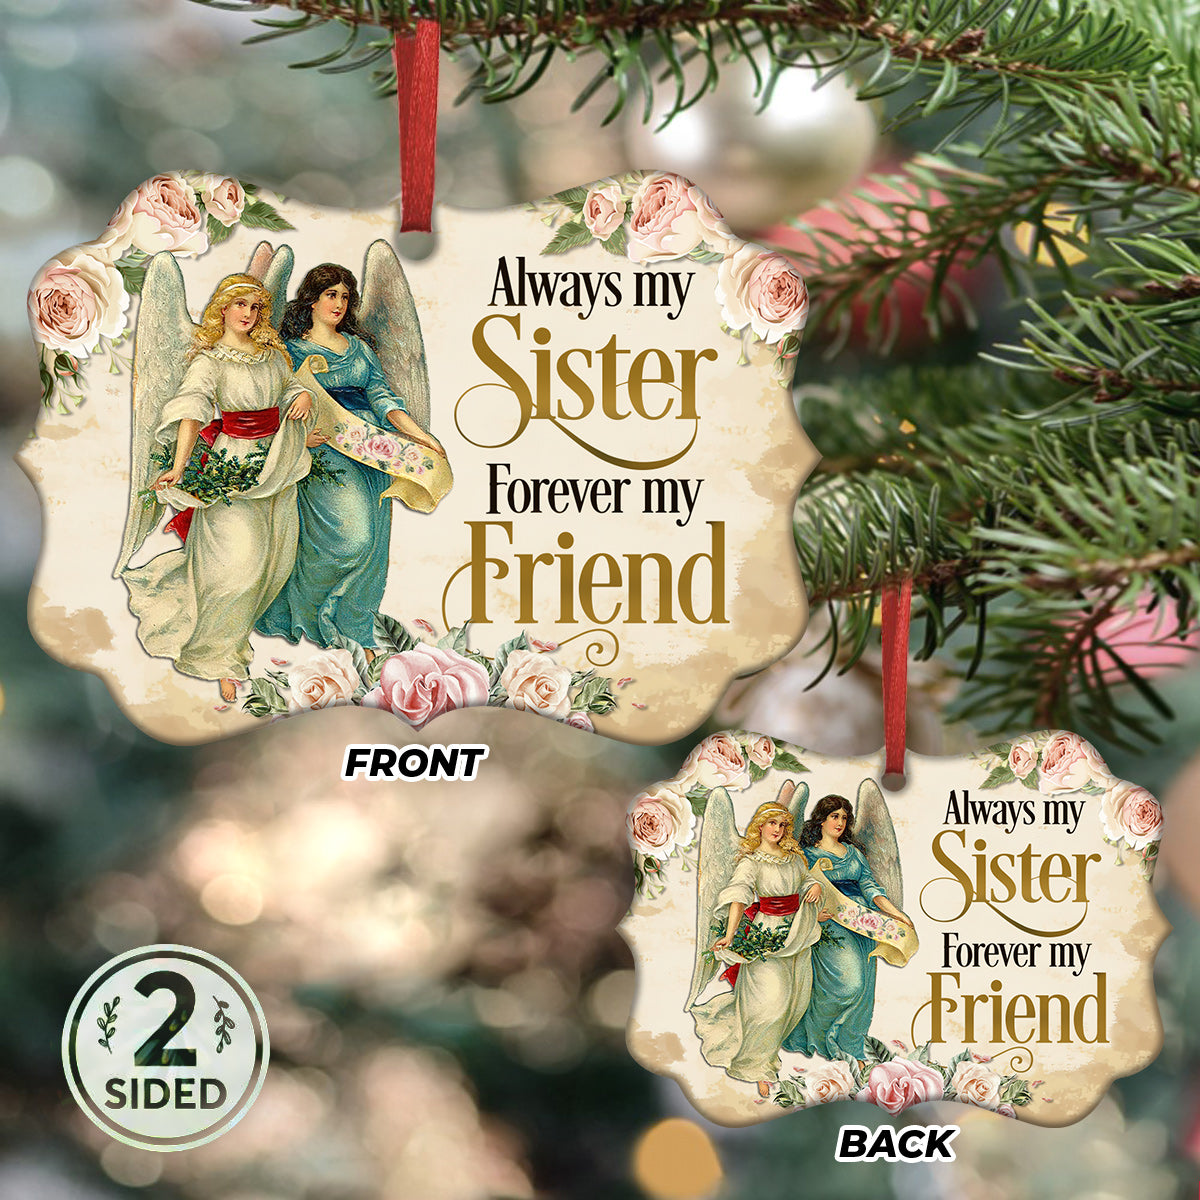 Sister Angel Always My Sister Forever My Friend Metal Ornament - Christmas Ornament - Christmas Gift